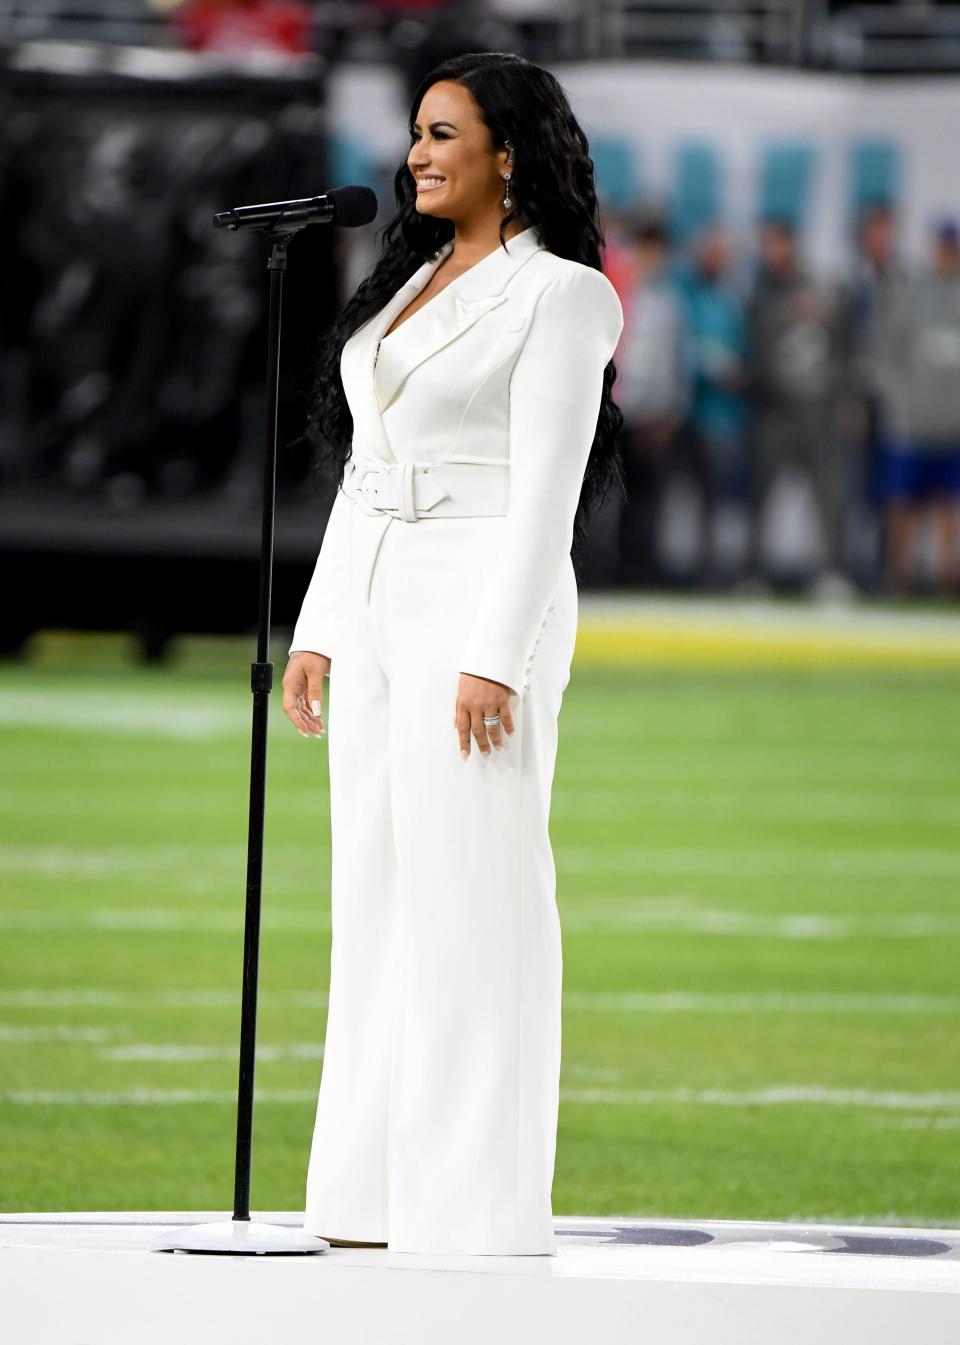 Demi Lovato sings the national anthem at Super Bowl LIV in Miami on Feb. 2.